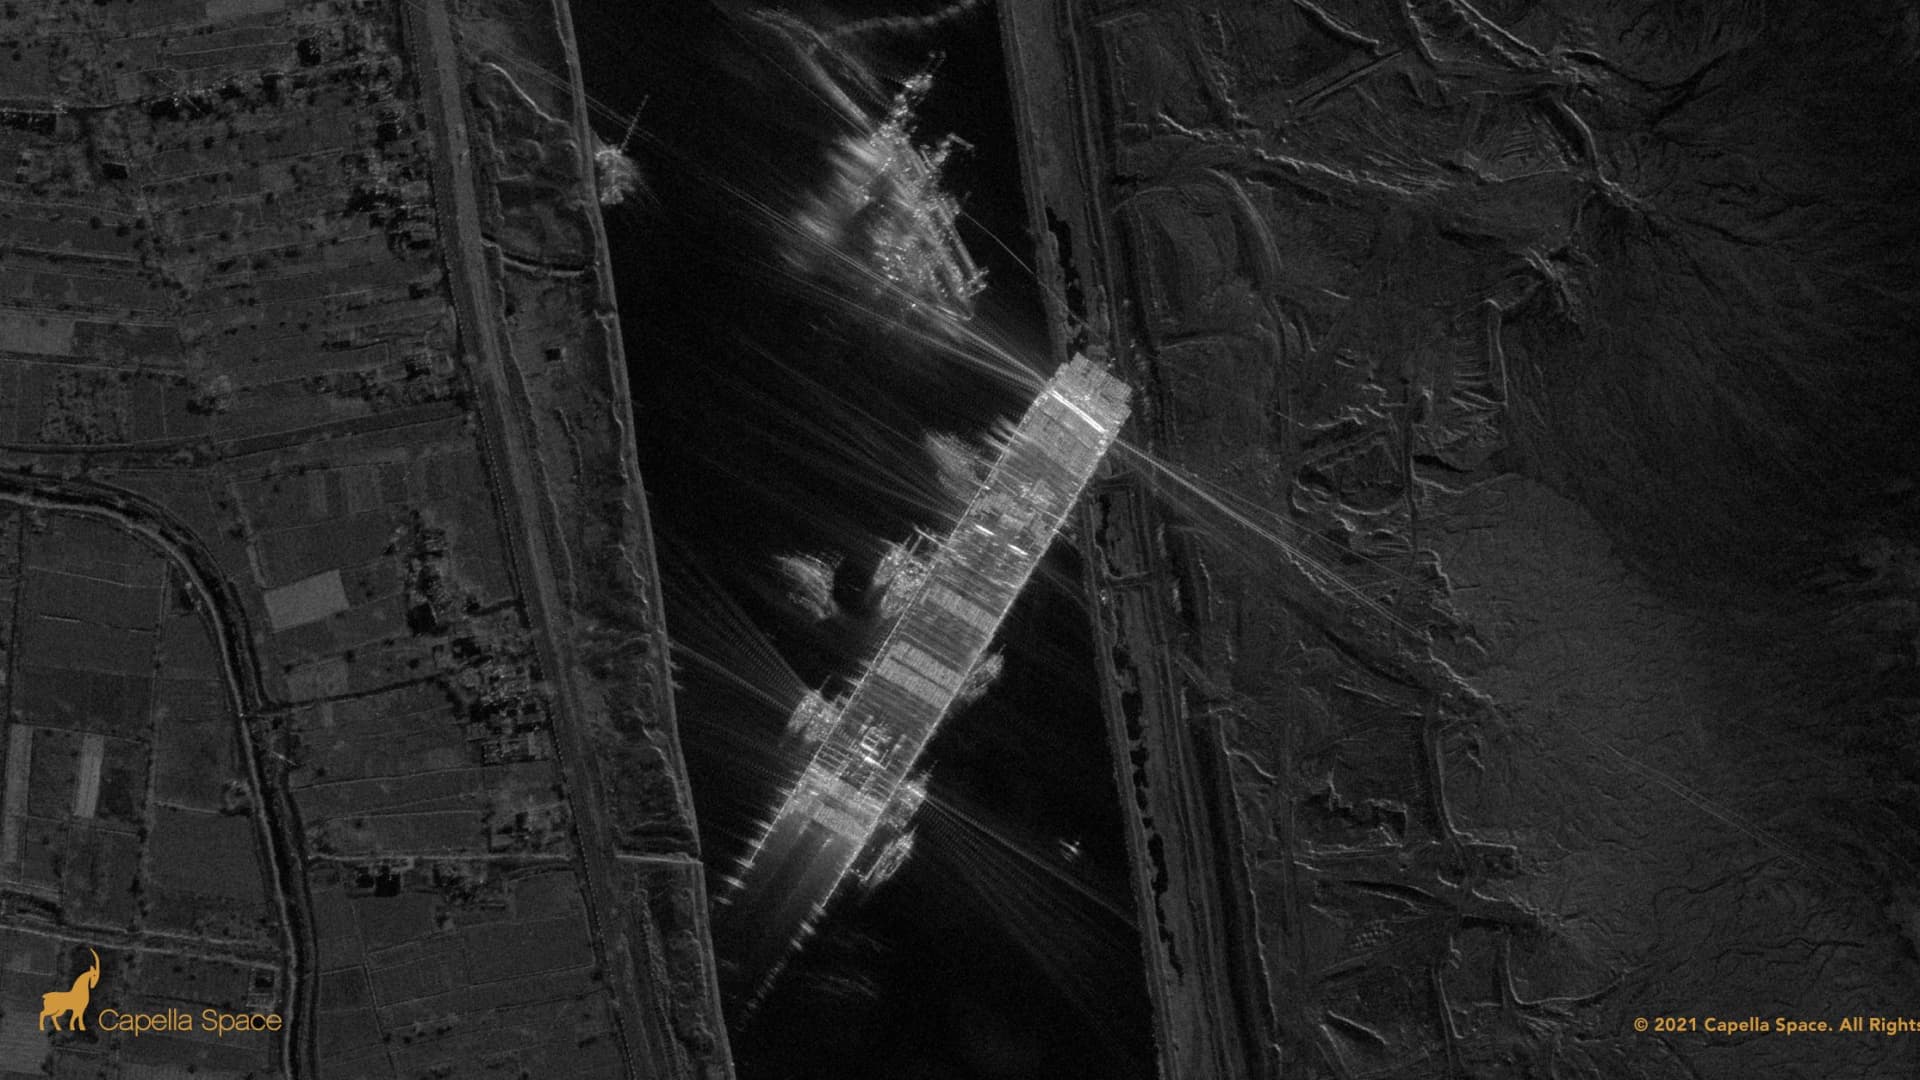 A synthetic aperture radar image captured by a Capella satellite on the evening of March 25 shows the Ever Given ship surrounded by support boats in the Suez Canal.